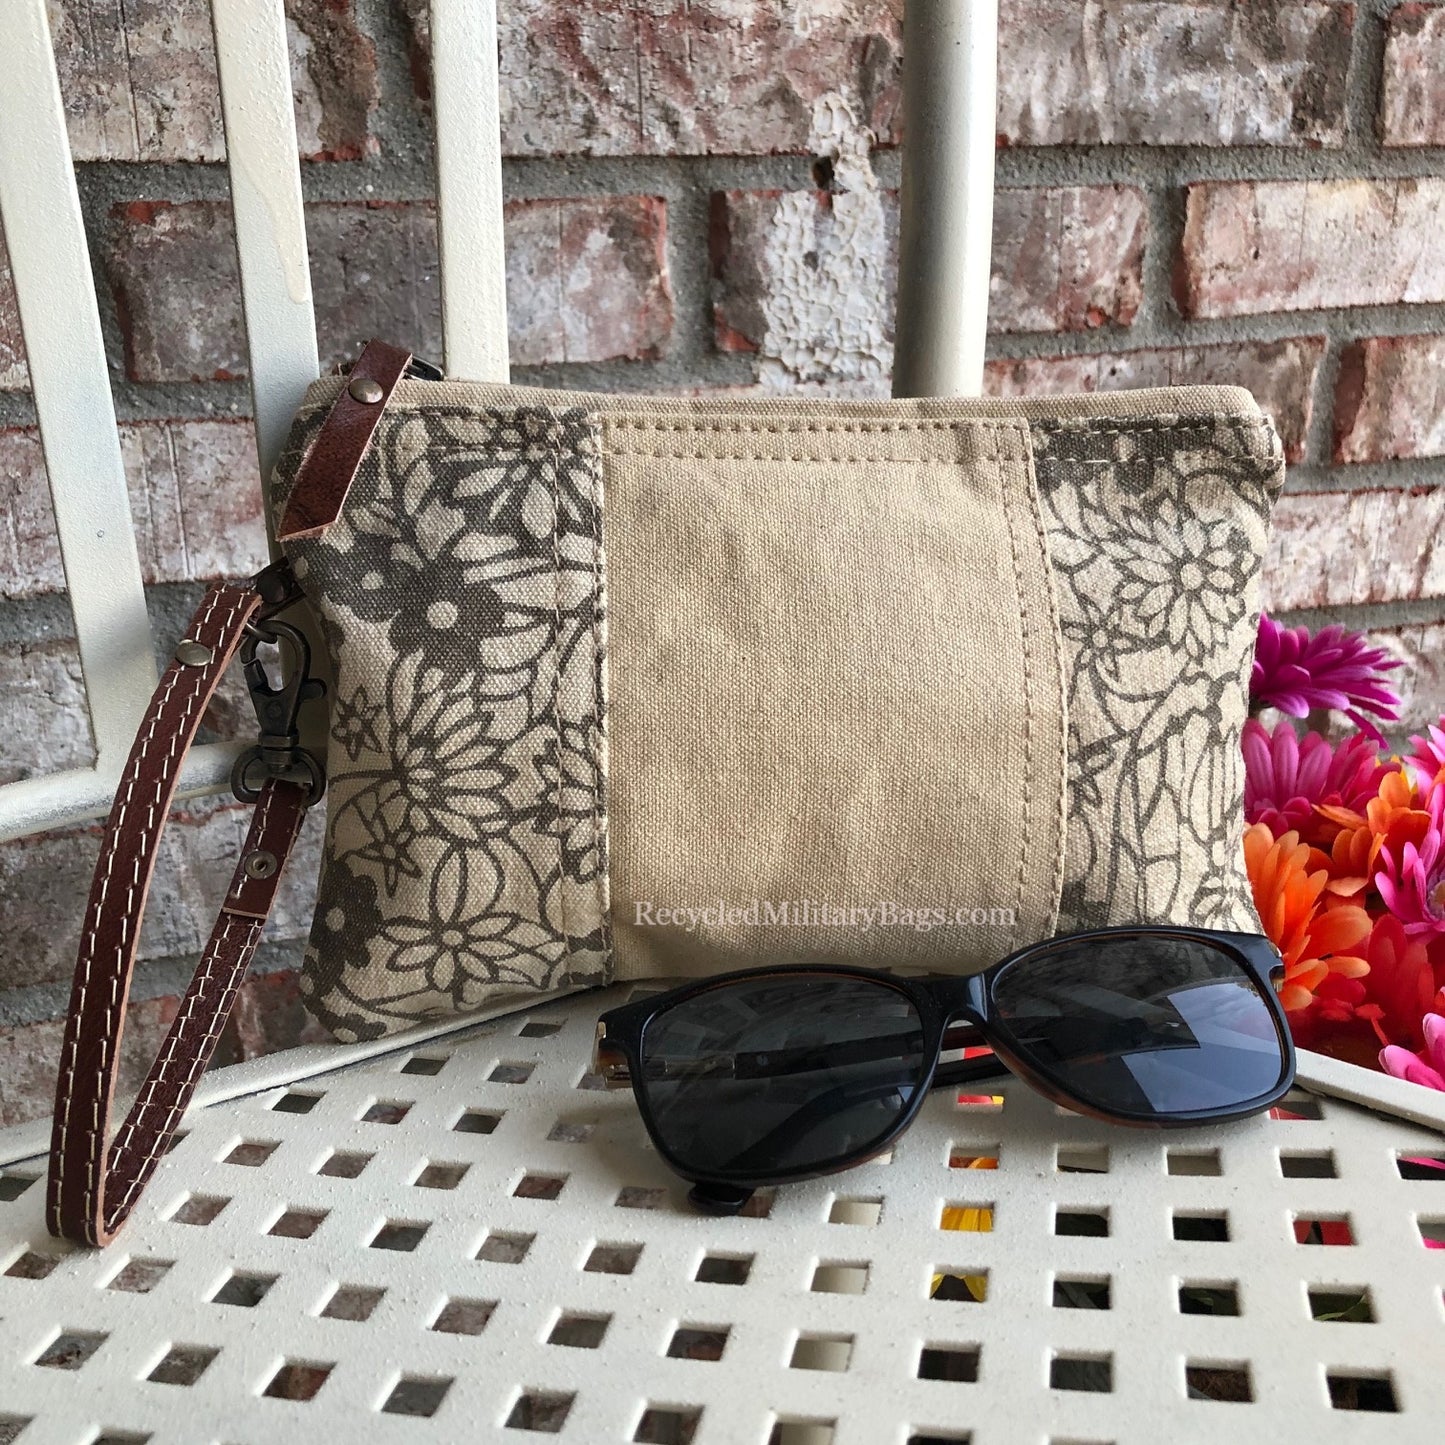 Cream and Cinnamon Floral Canvas Wristlet or Makeup Bag! A Perfect Gift or Add On!